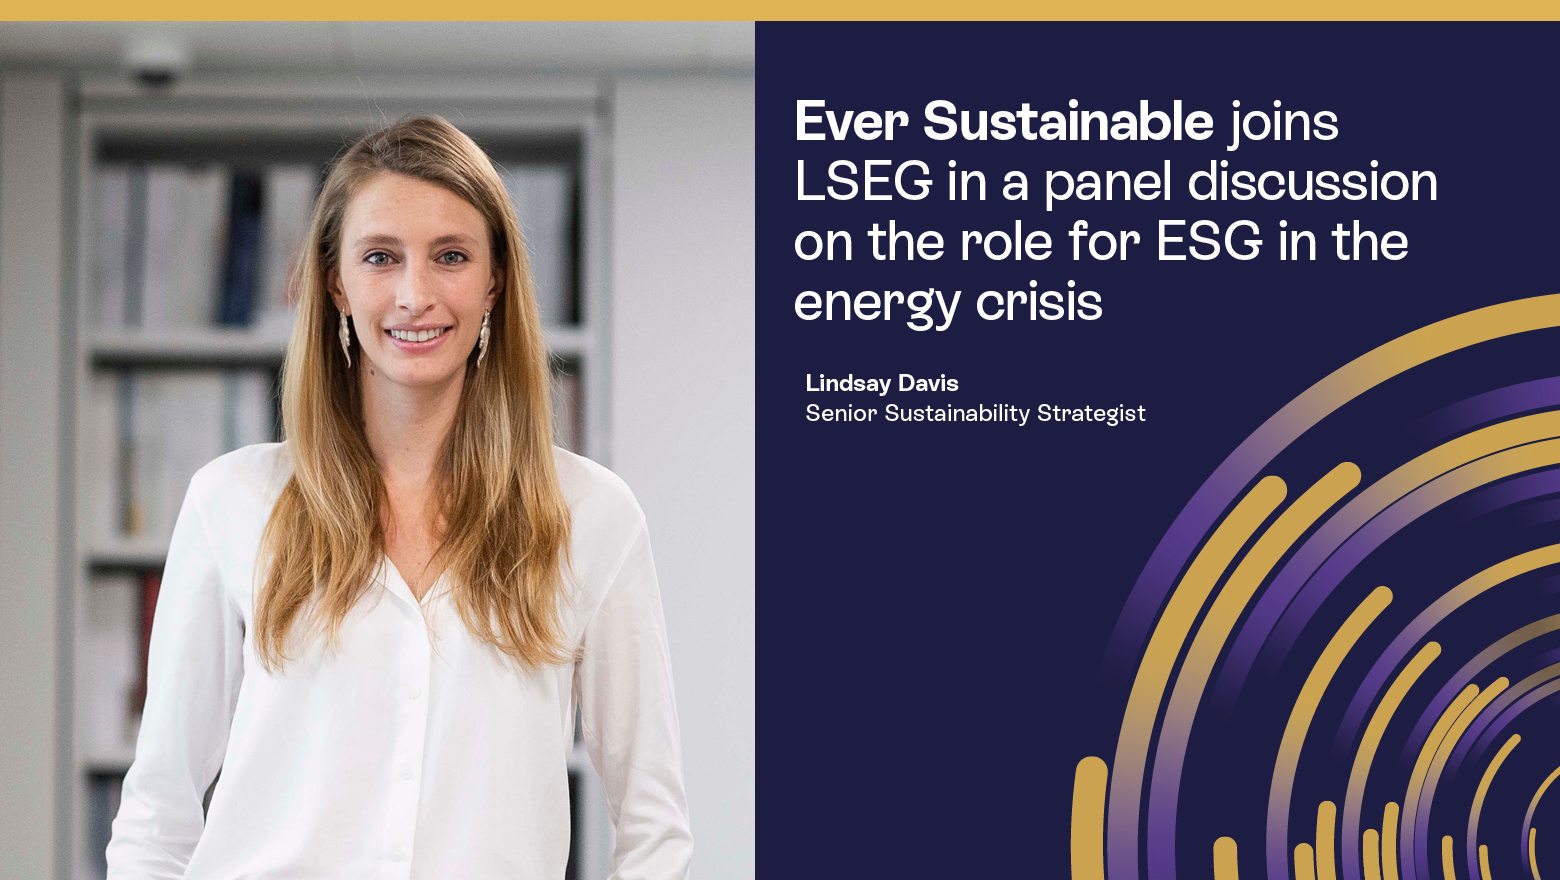 Ever Sustainable joins LSEG in a panel discussion on the role for ESG in the energy crisis